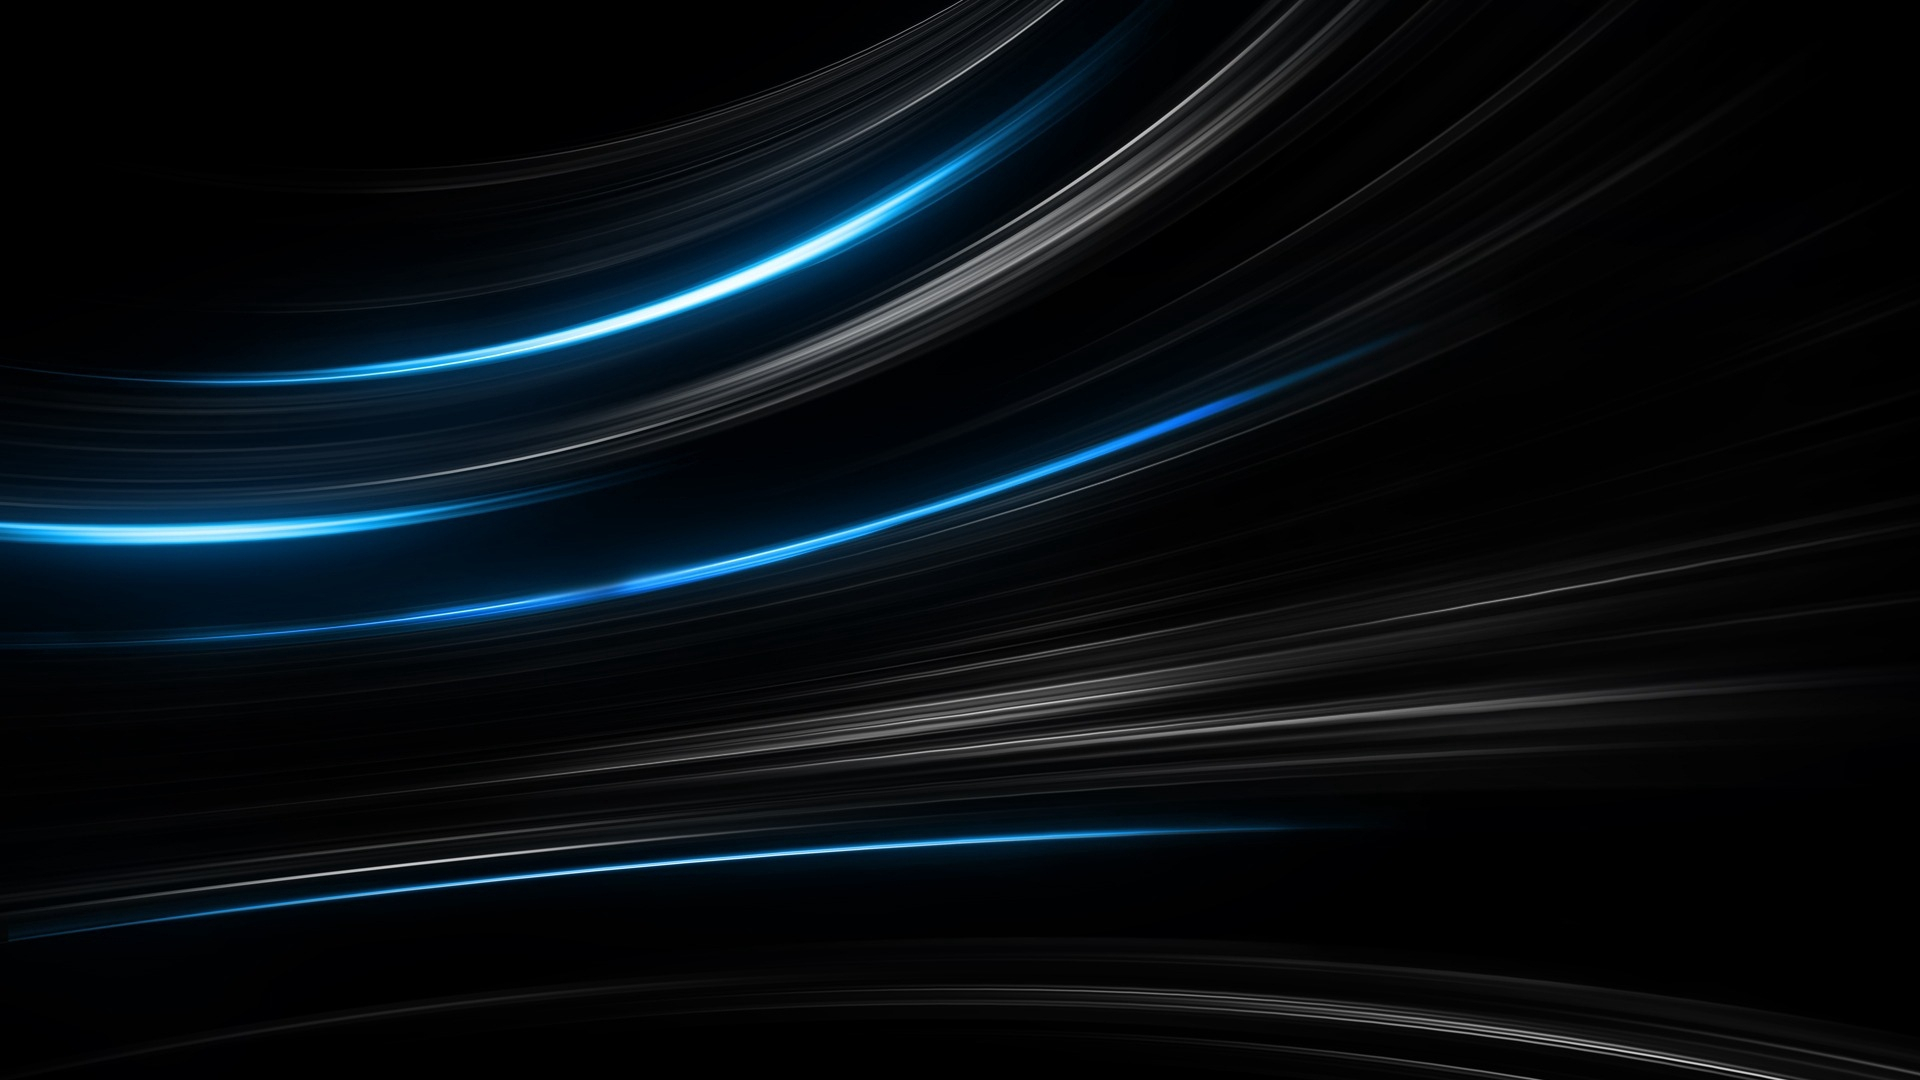 10 Best Black And Blue Background Hd FULL HD 1920×1080 For PC Background